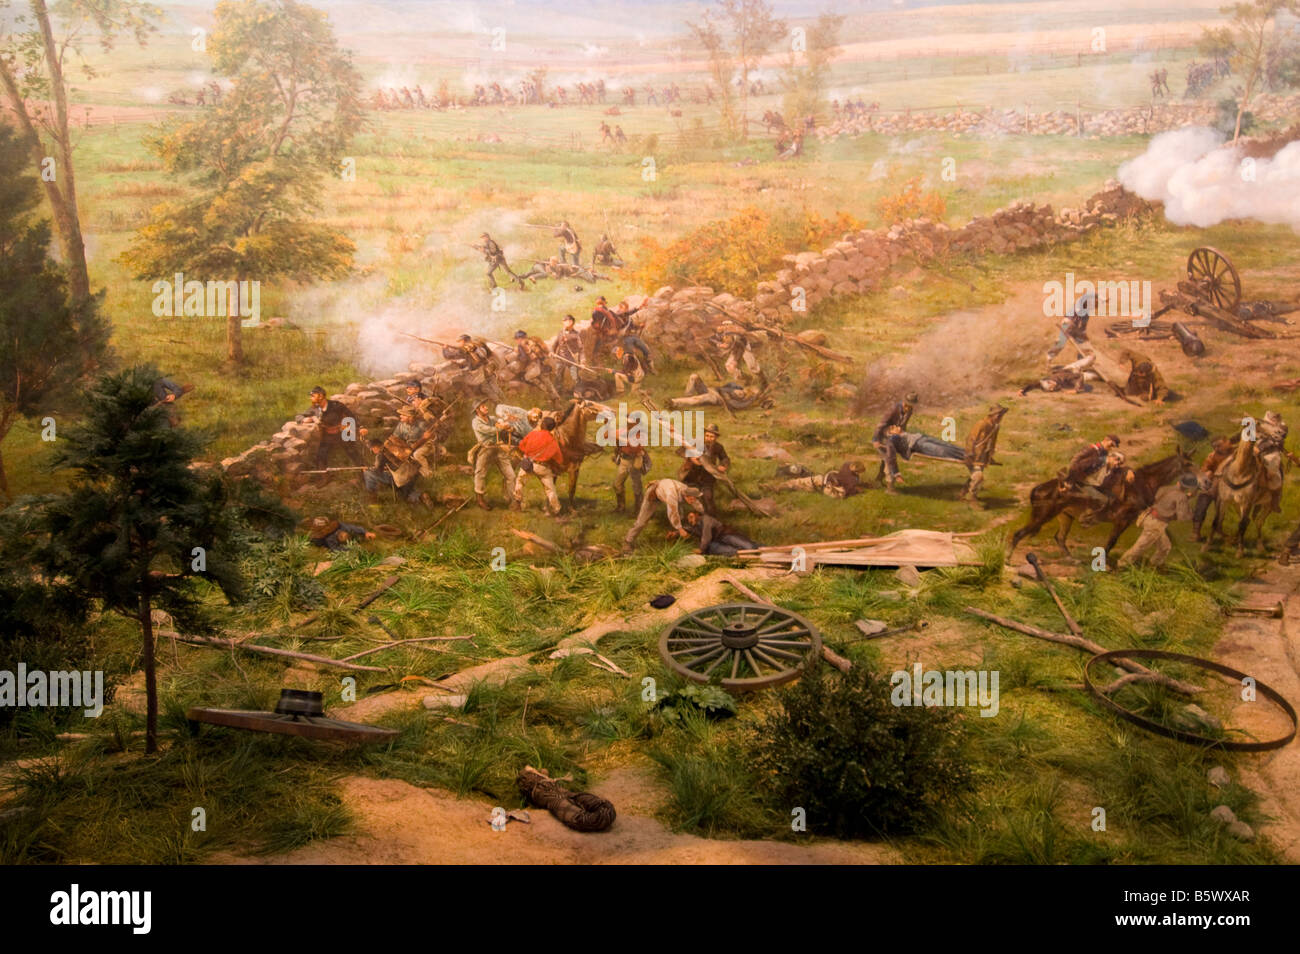 A section of the Cyclorama at Gettysburg National Military Park, Pennsylvania Stock Photo